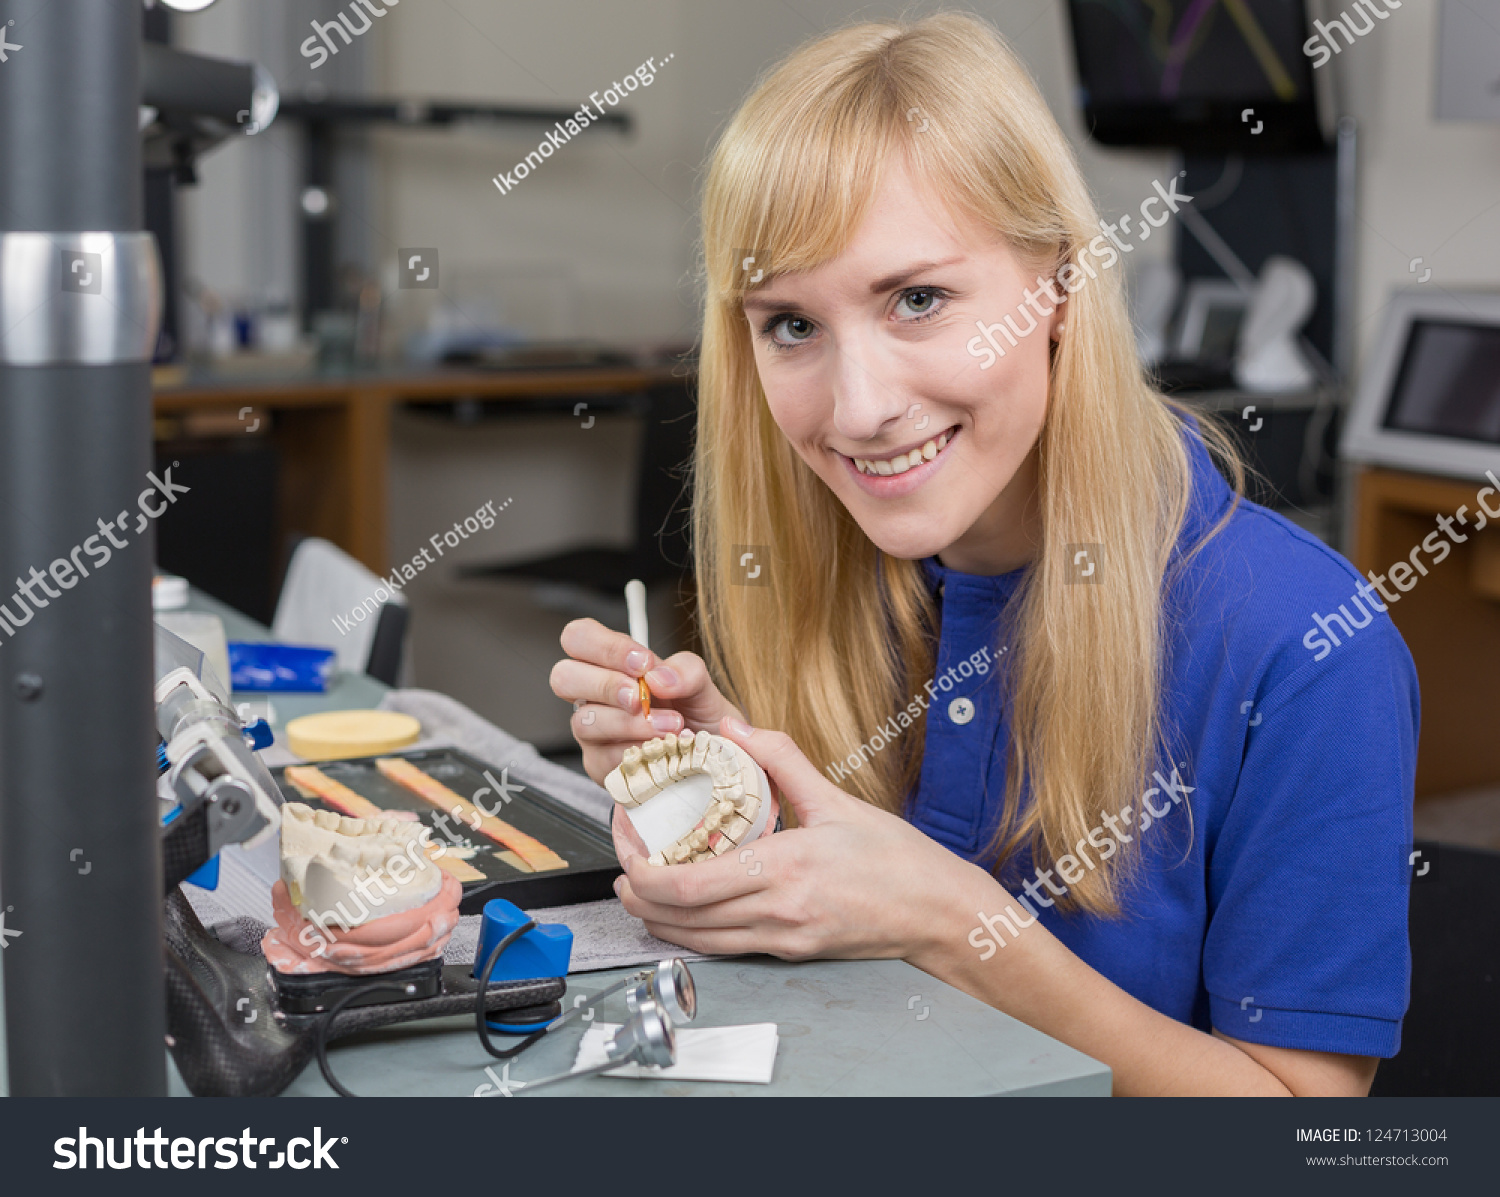 Dental Lab Technician Applying Porcelain To Dentition Mold In A Lab ...